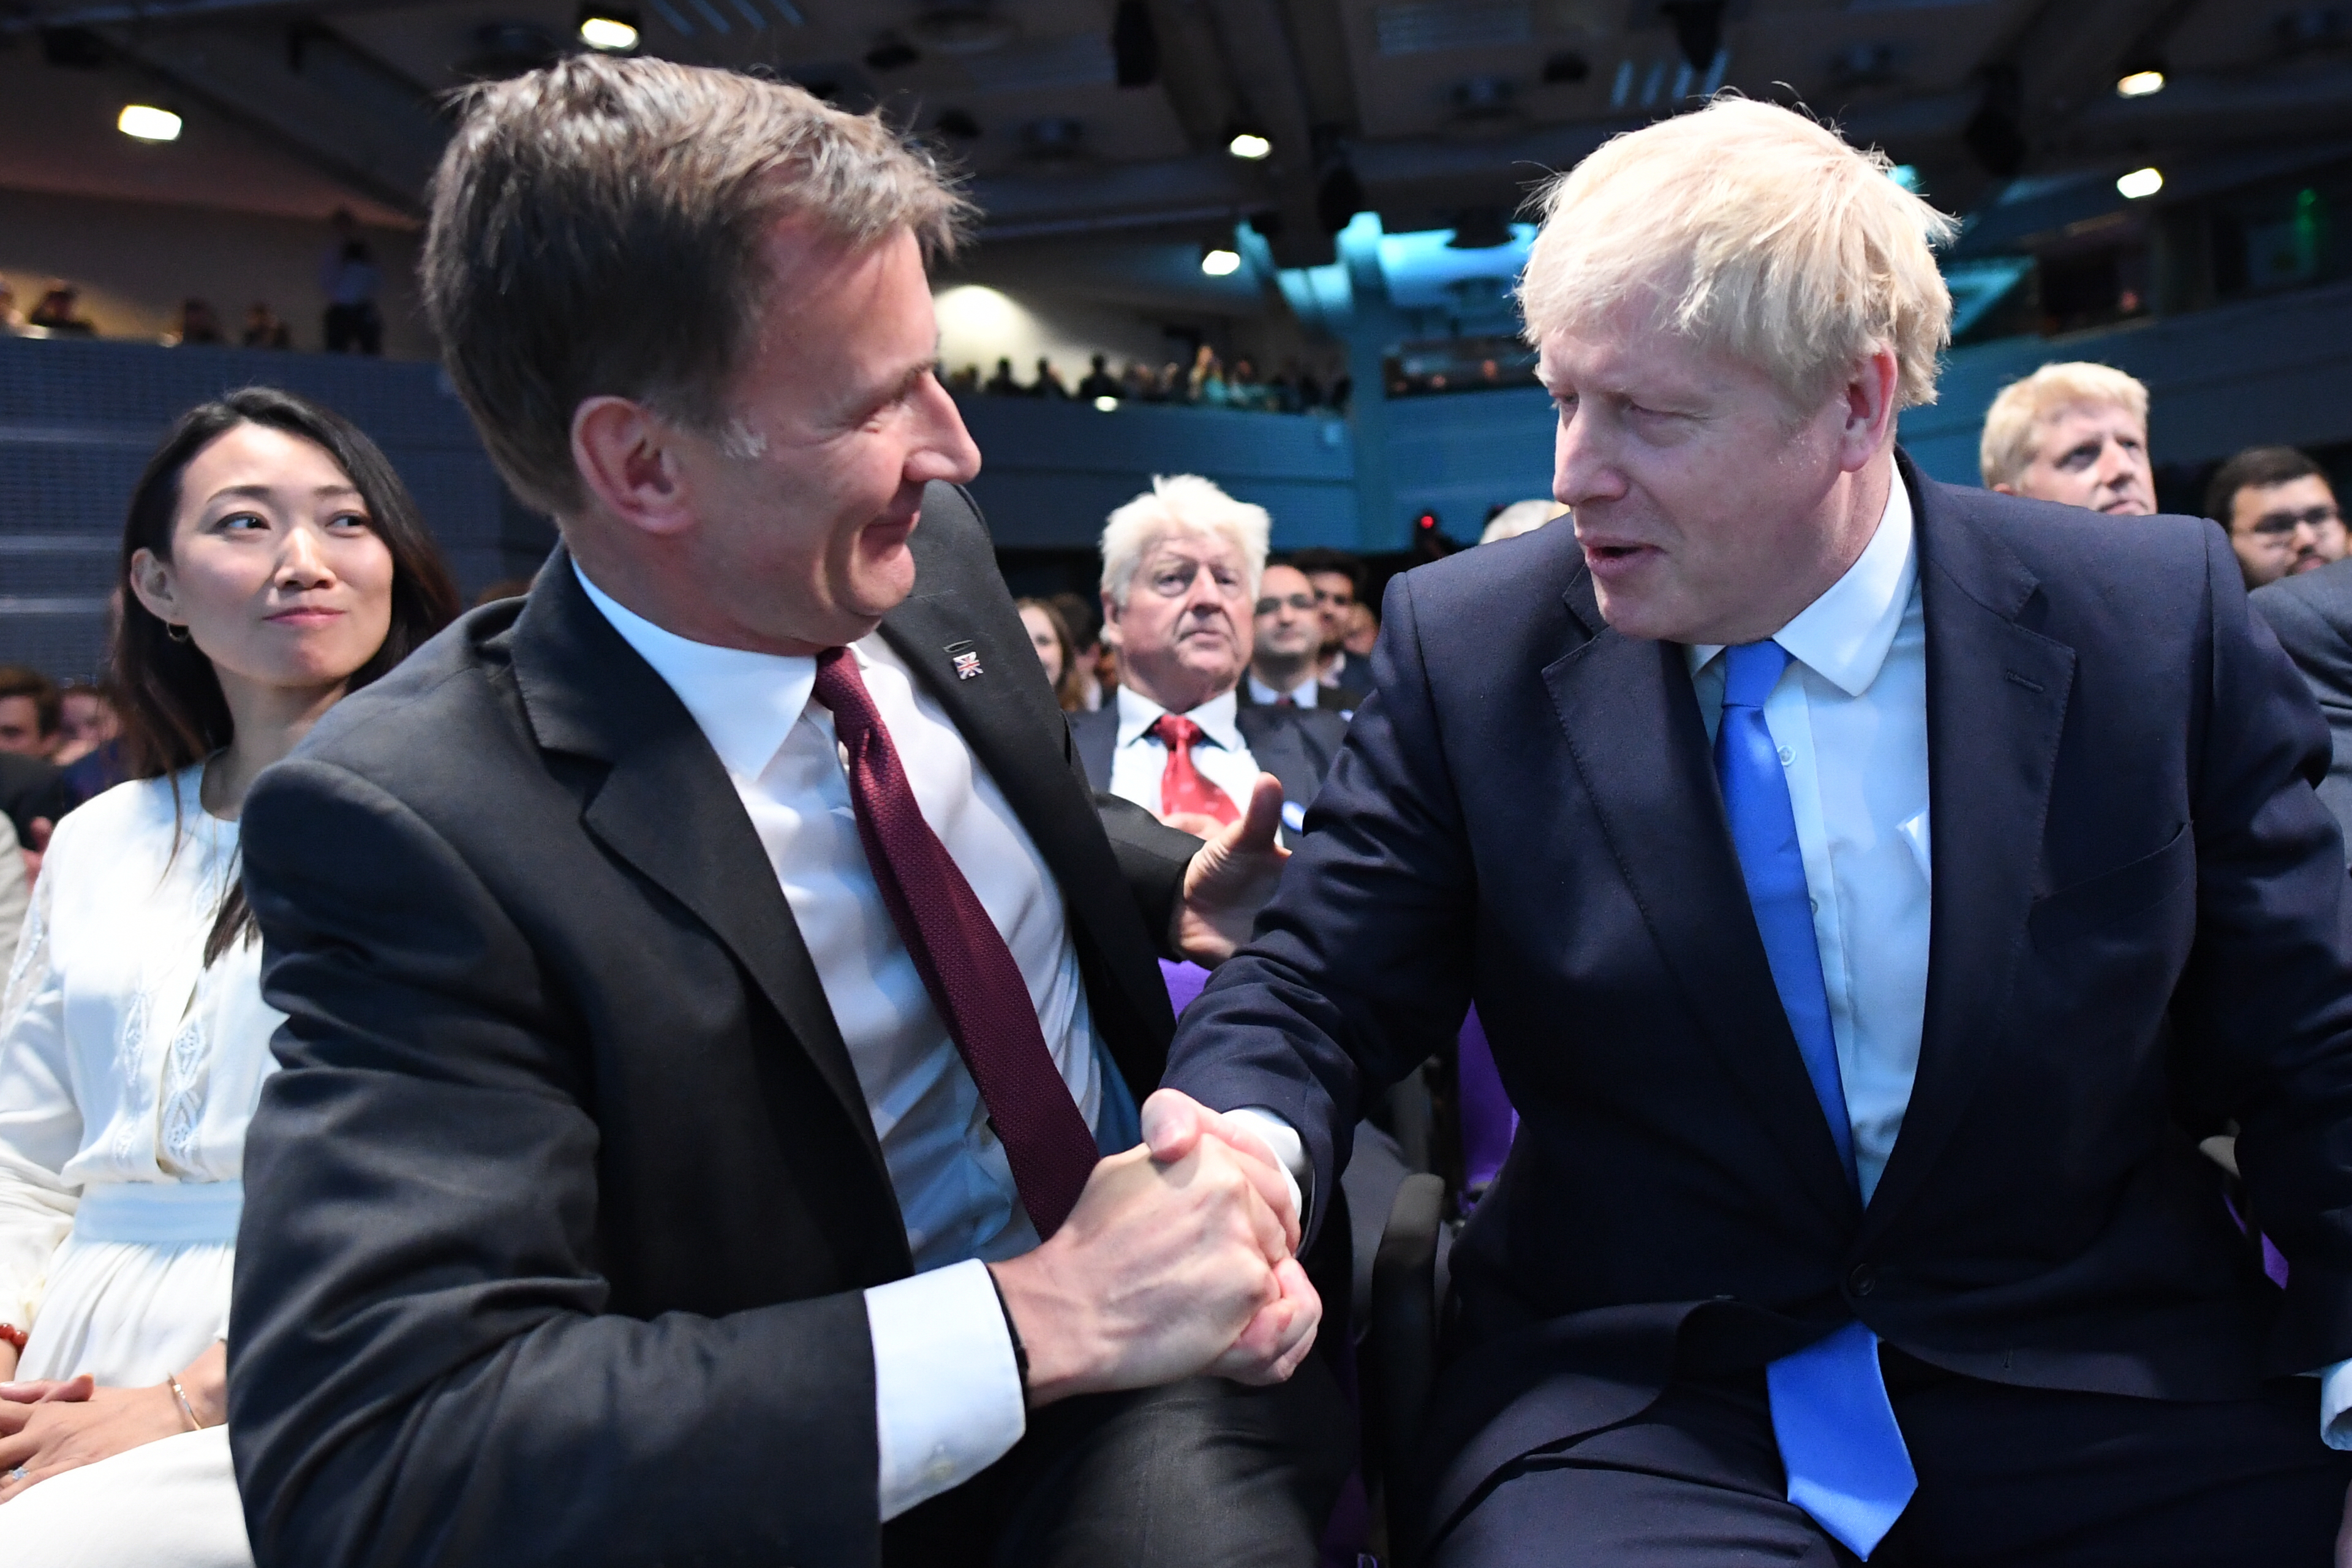 Jeremy Hunt (left) congratulates Boris Johnson at the Queen Elizabeth II Centre in London where he was announced as the new Conservative party leader.